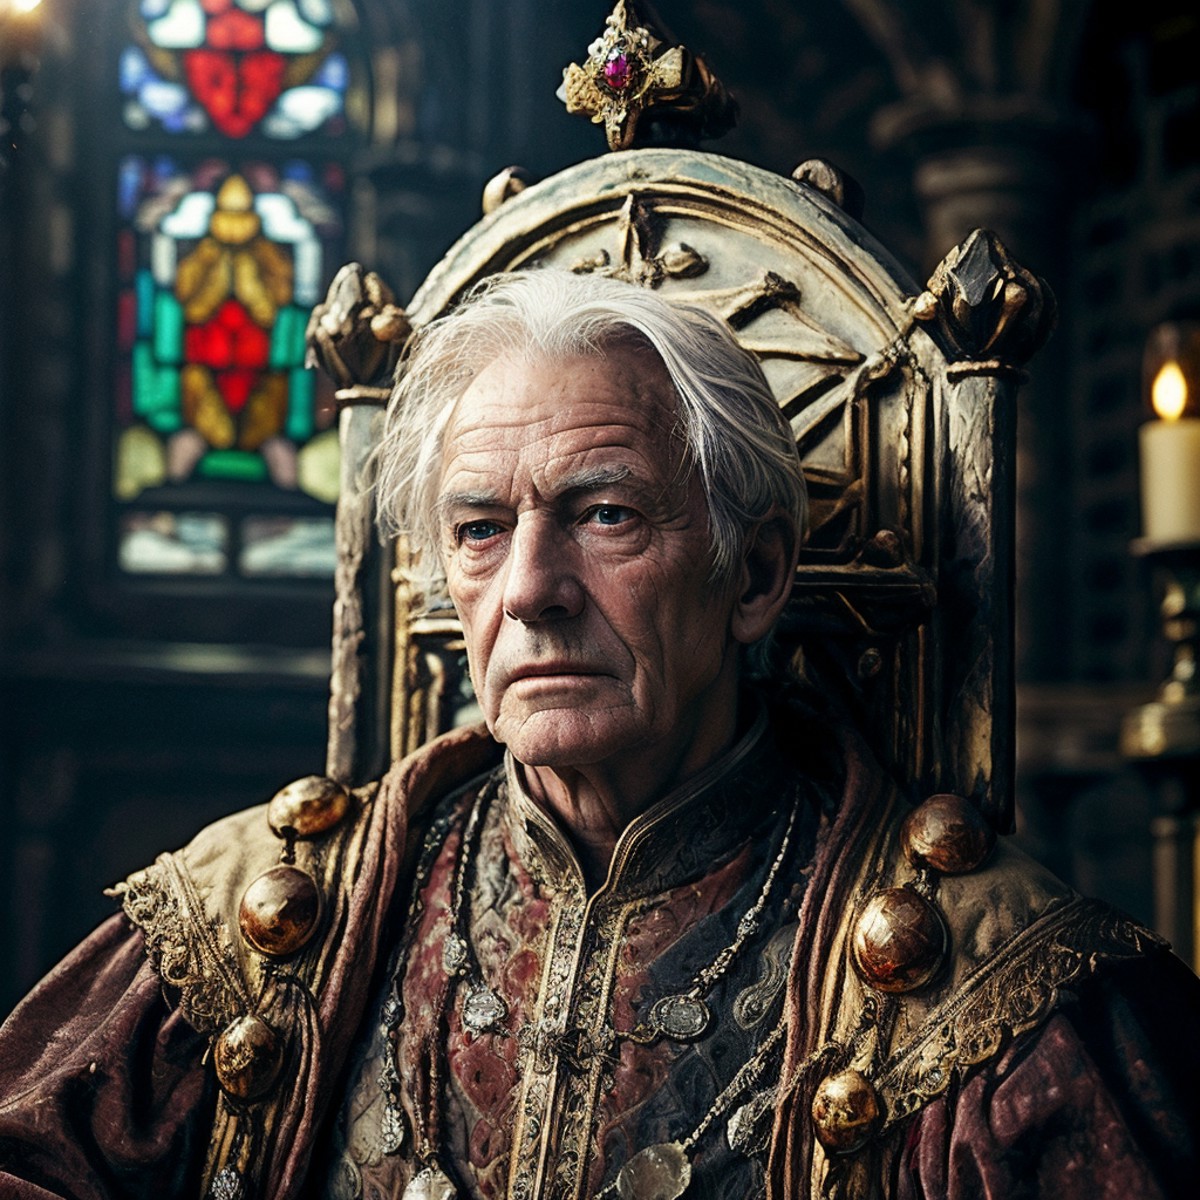 highly detailed horro photo of (rpgroyalty:1.0) in a medieval throne room,

old, jewelry, white hair, old man,

looking at...